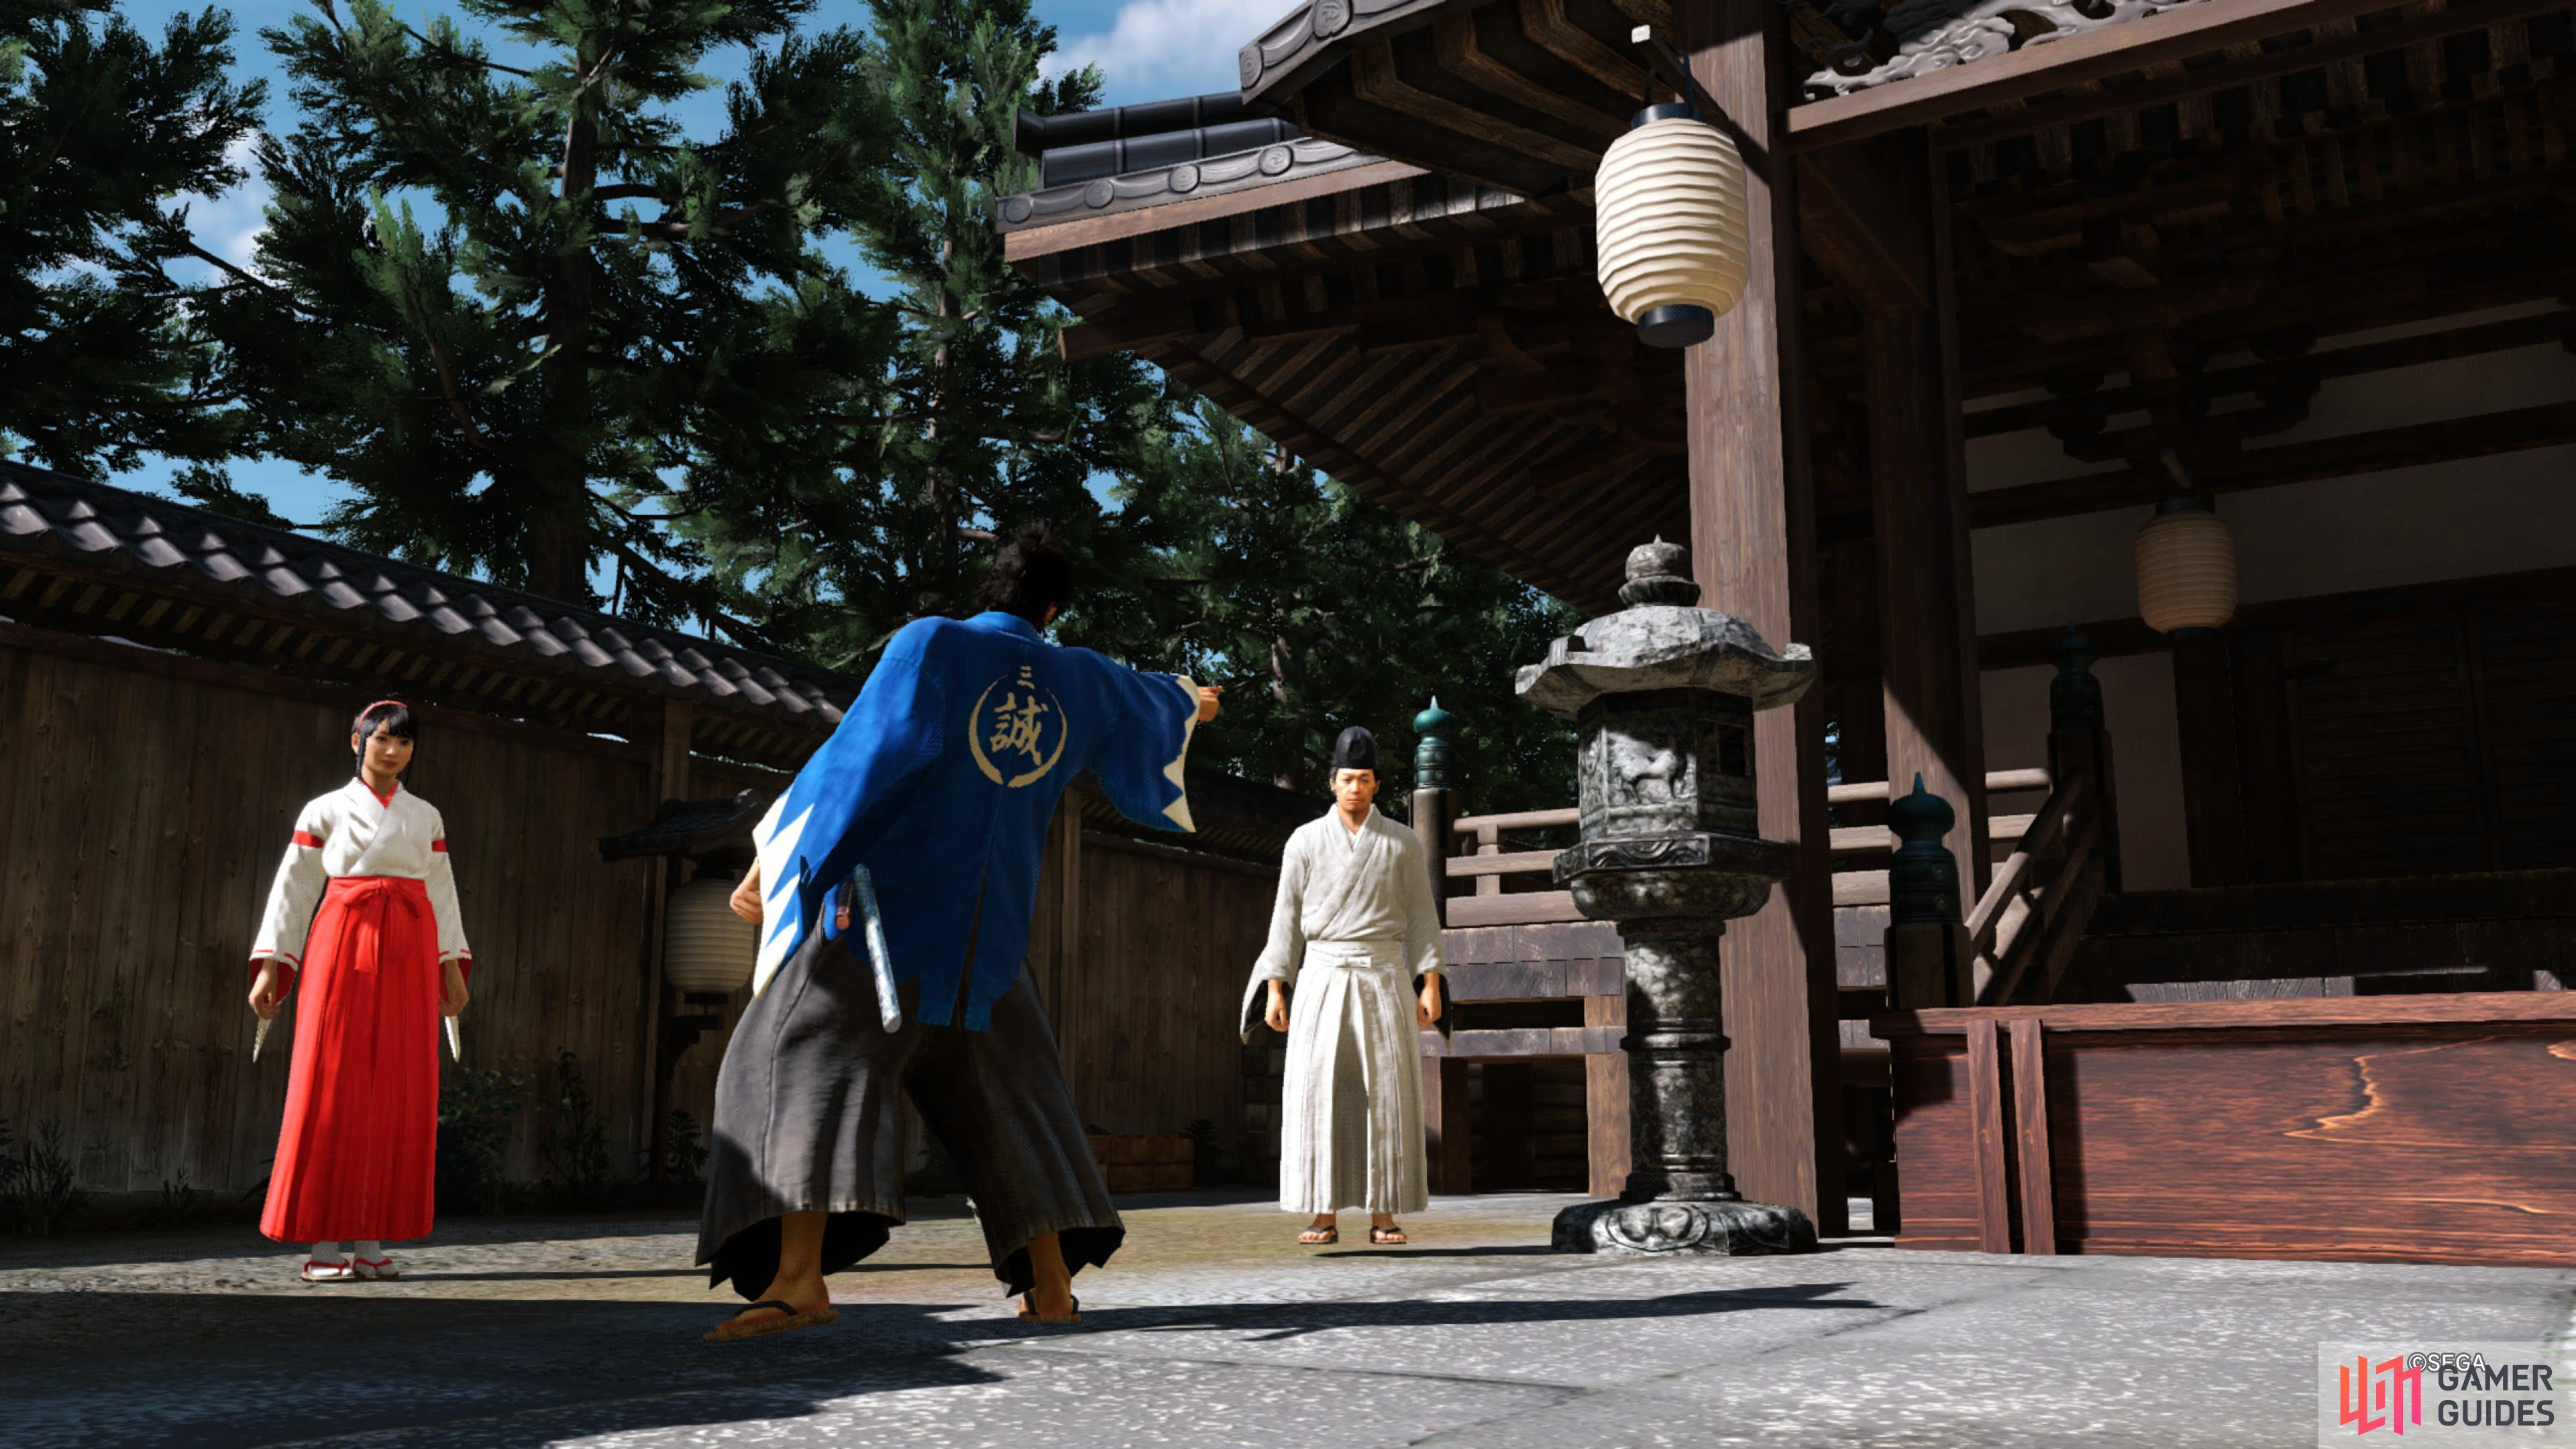 You can spend Virtue (currency) to purchase rare items from the Shinto Priest’s Shop.